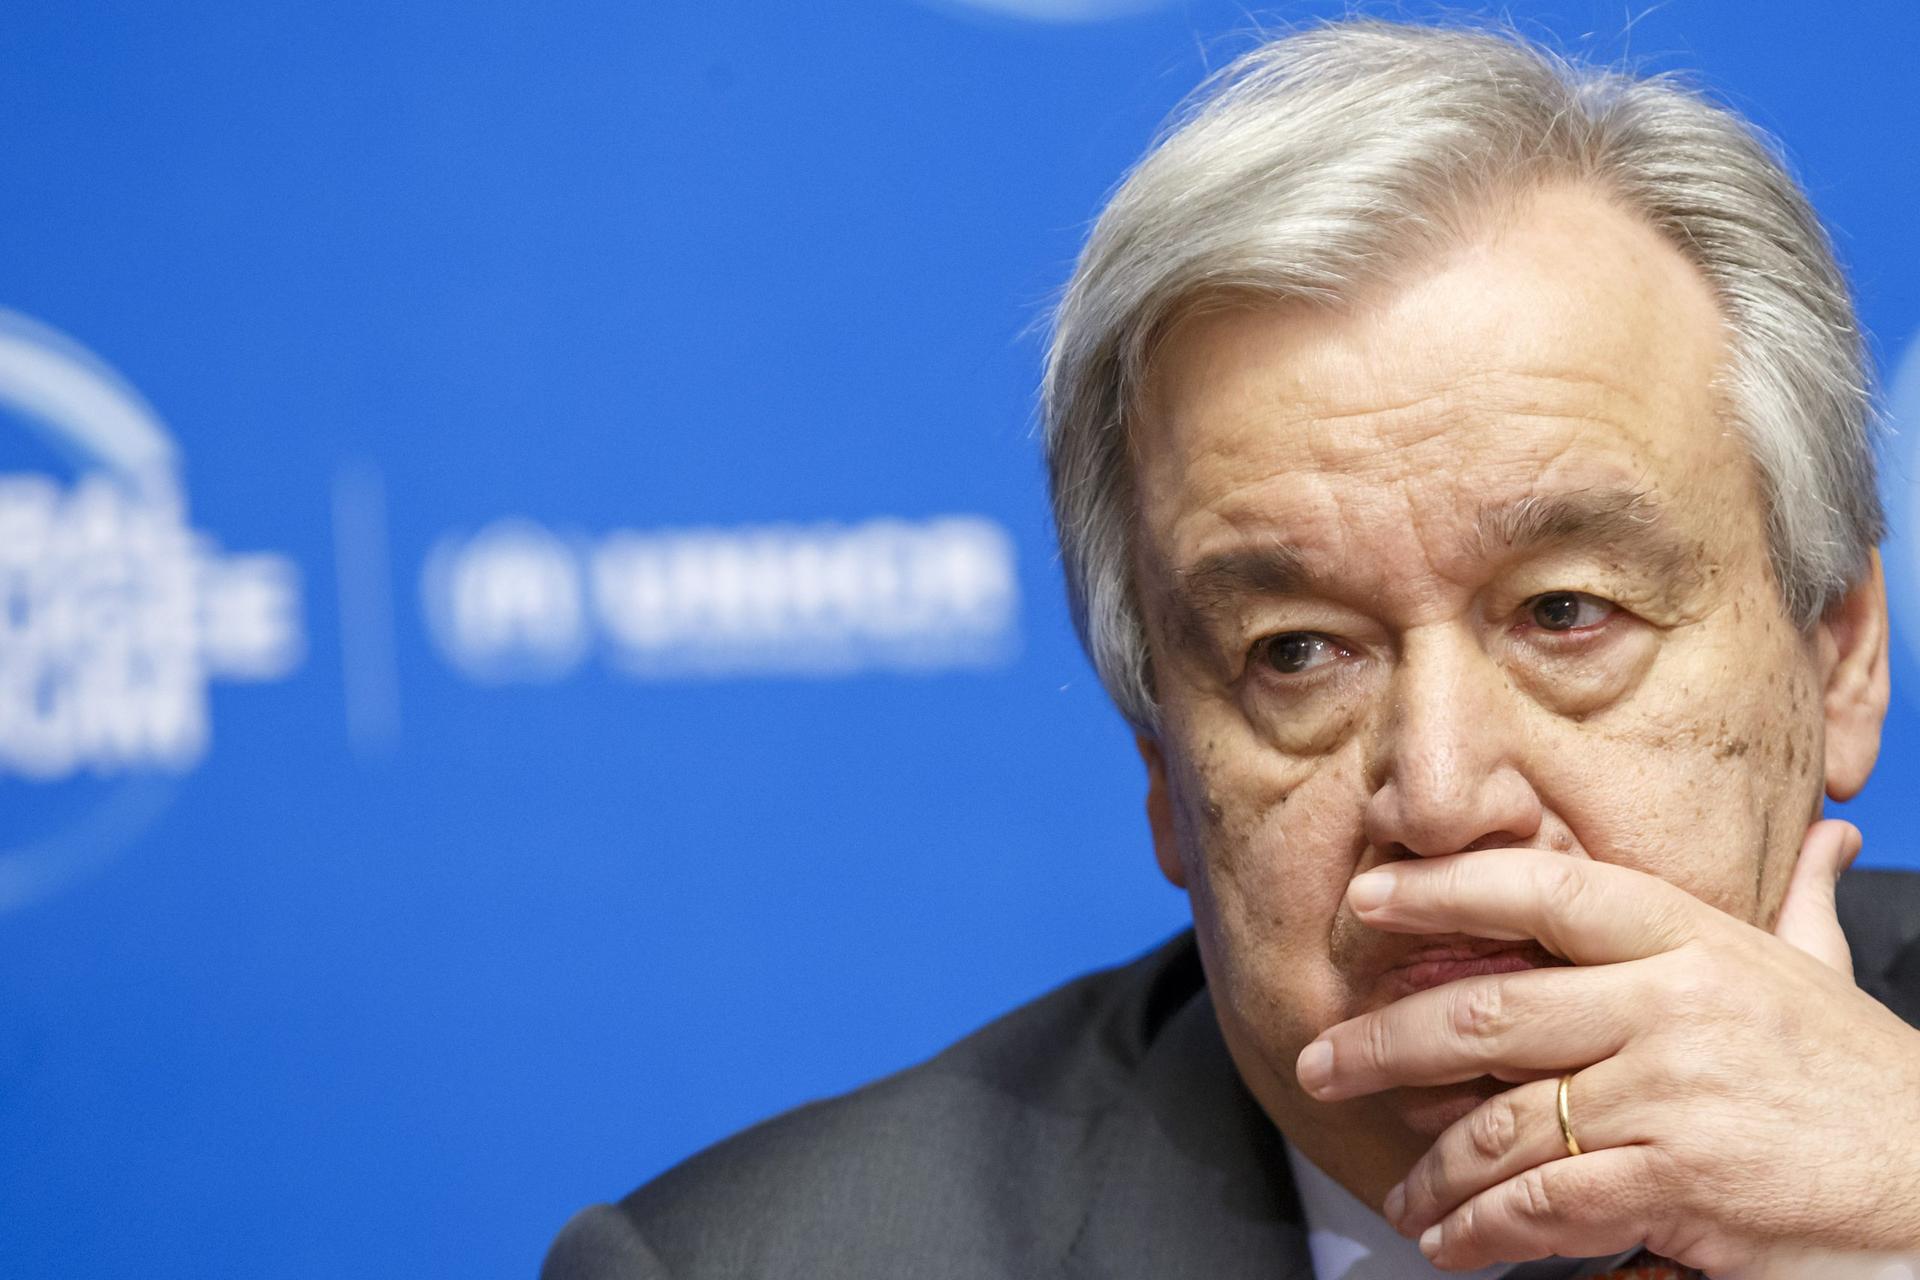 UN chief urges faith leaders to challenge harmful messages